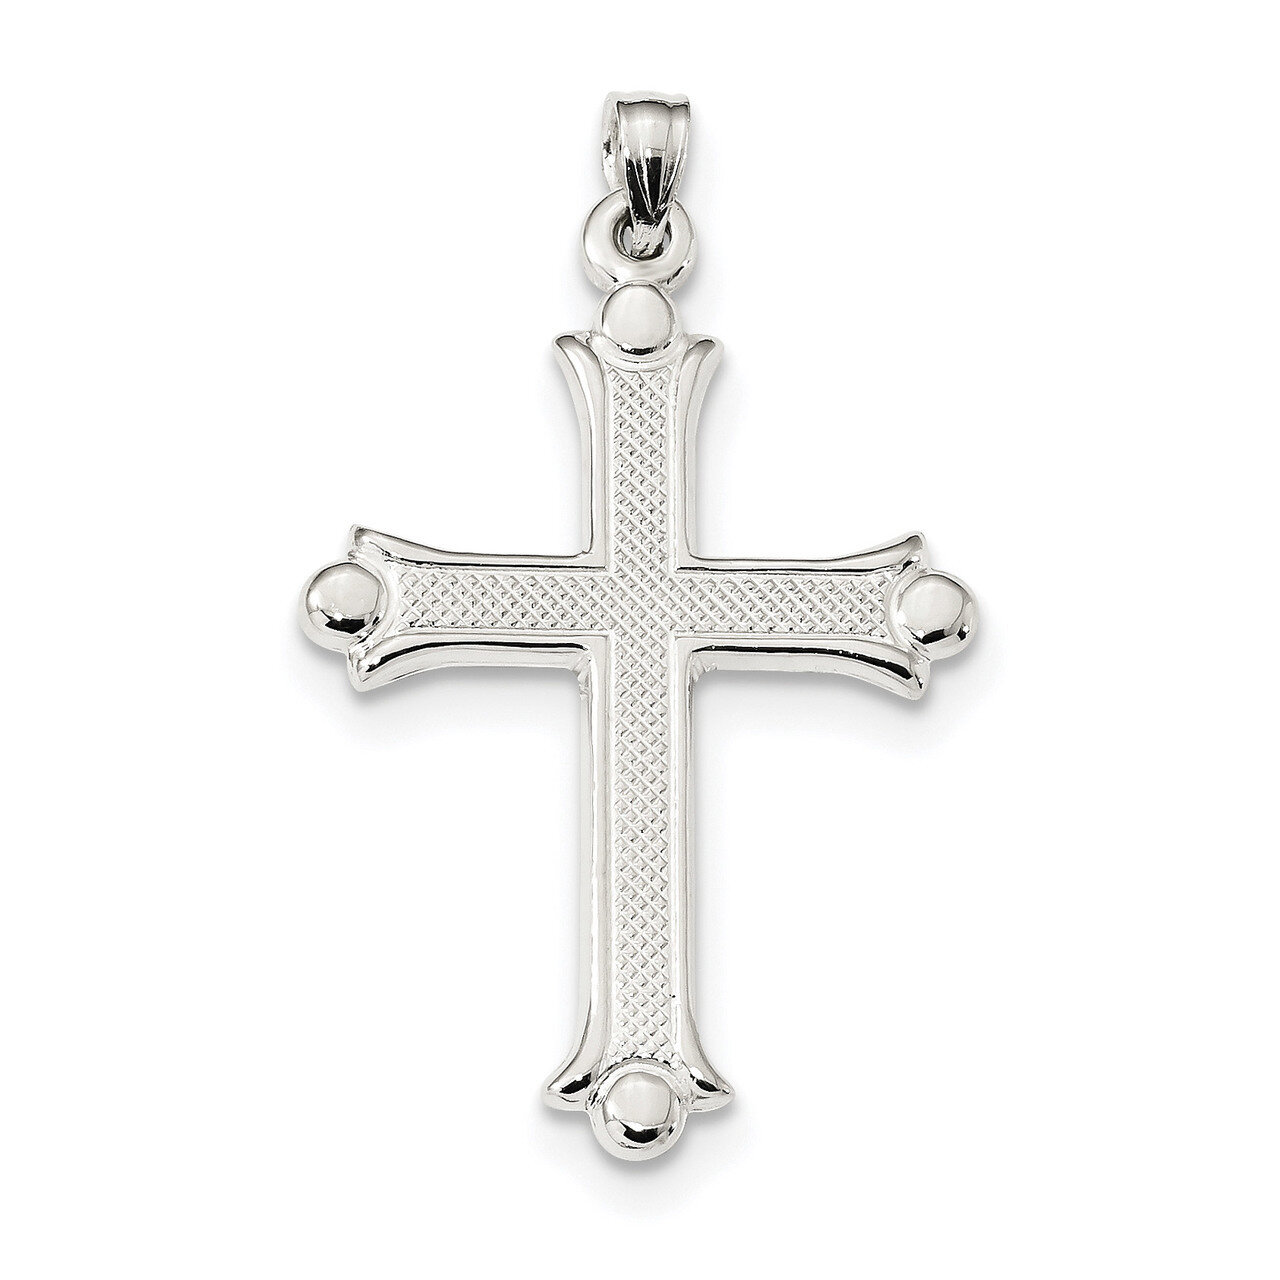 Textured Budded Cross Pendant Sterling Silver QC9076